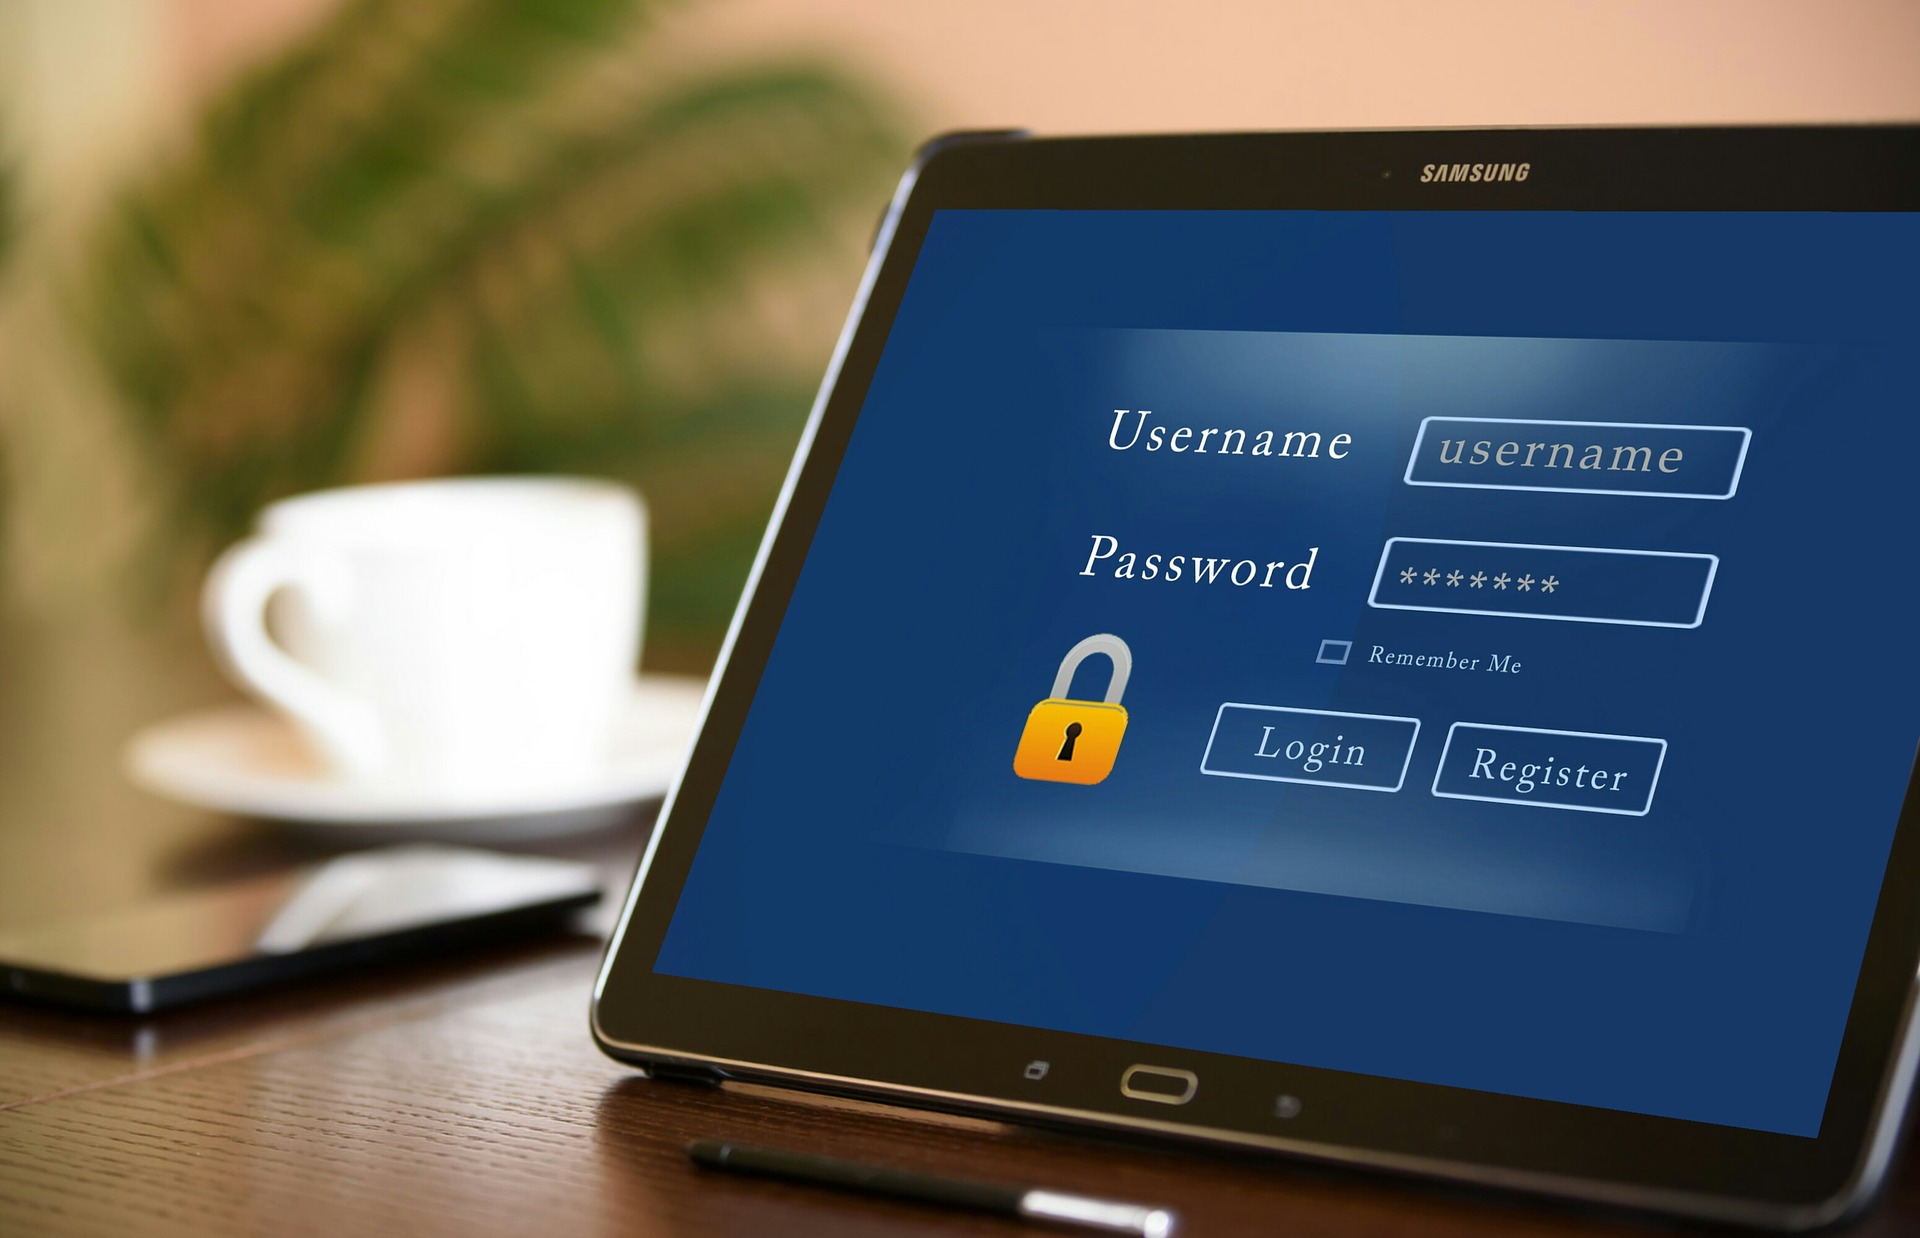 Choosing strong and separate passwords